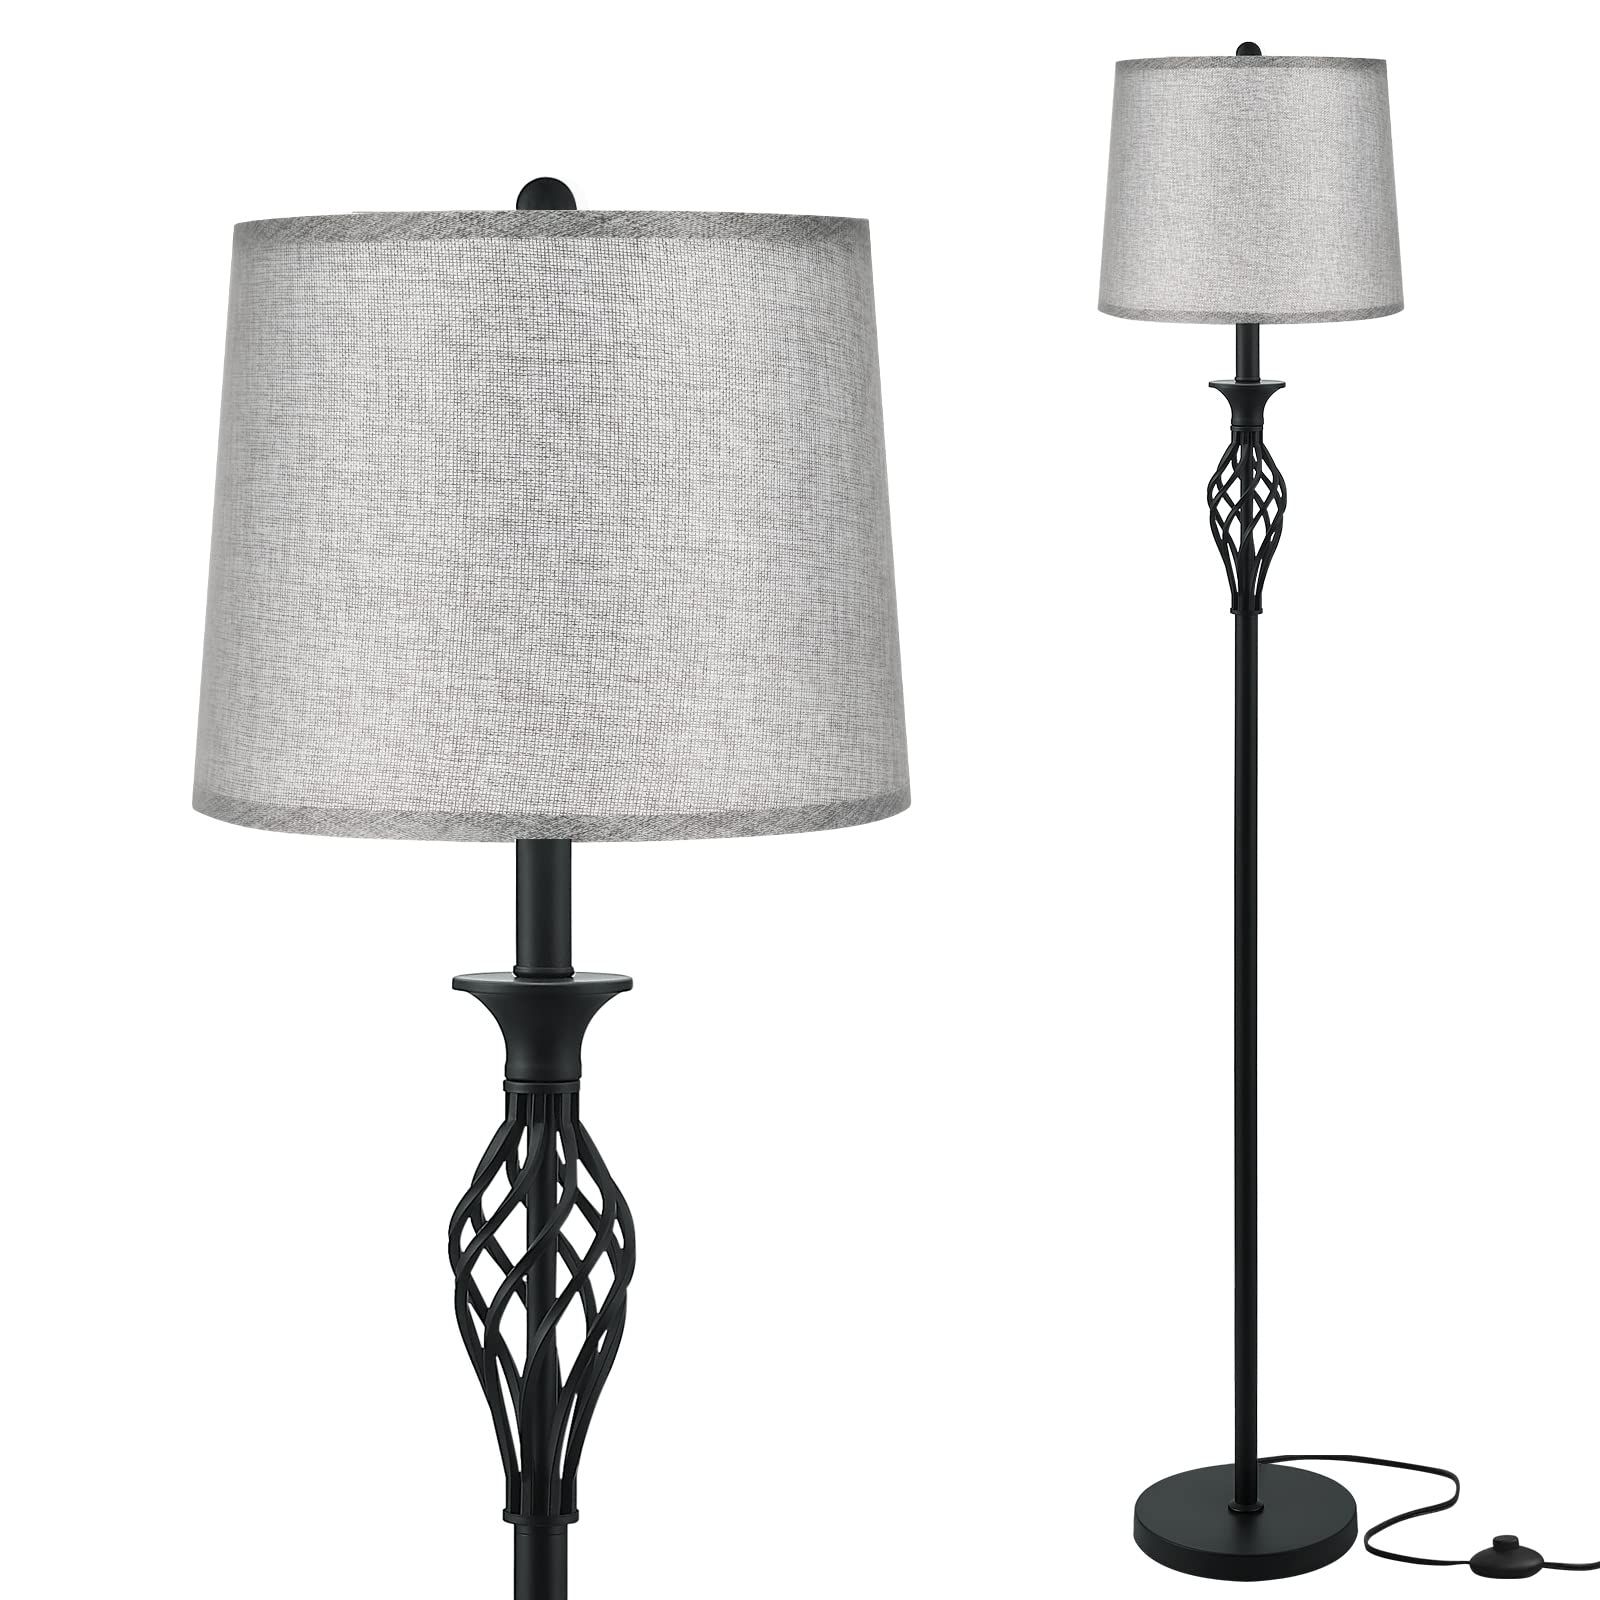 Grey Shade Standing Lamps Intended For Recent Floor Lamp For Living Room – Ambimall Classic Standing Lamp With Twist  Design, Vintage Tall Pole Lamp For Bedroom Kitchen Office Dinning Room  Reading, Grey Lampshade – – Amazon (View 13 of 15)